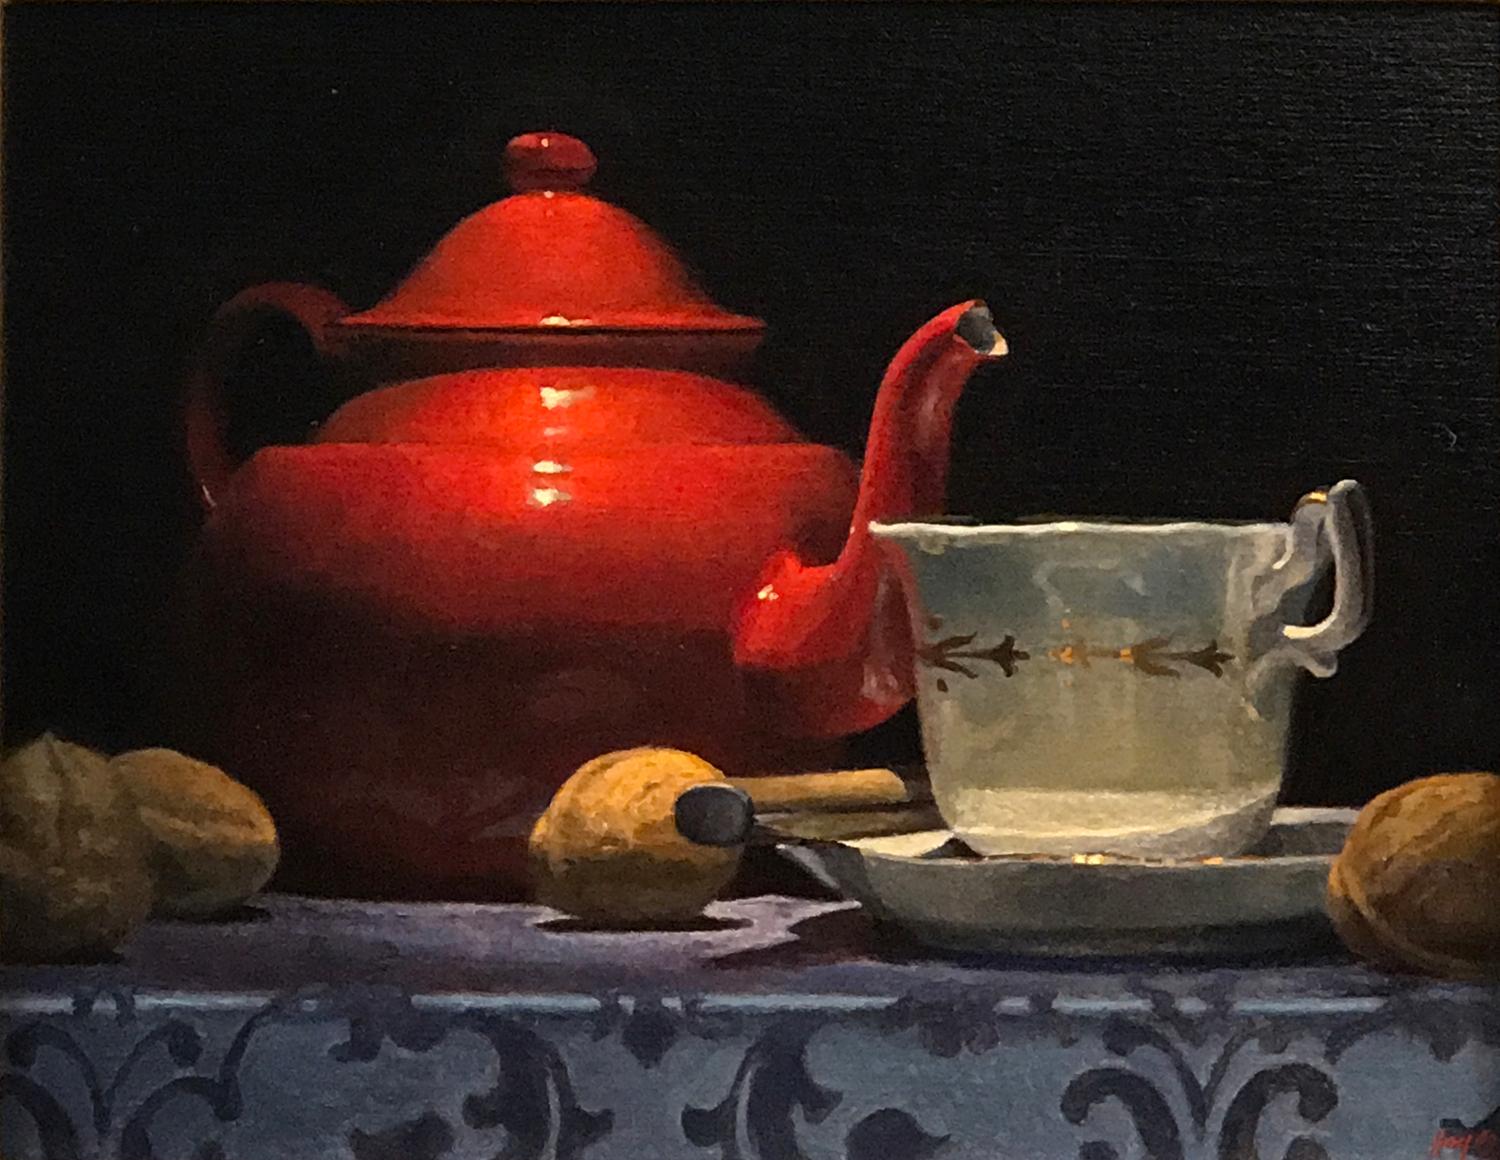 "Teapot, Teacup, Walnuts"Oil on linen on panel, 11x14 inches, available